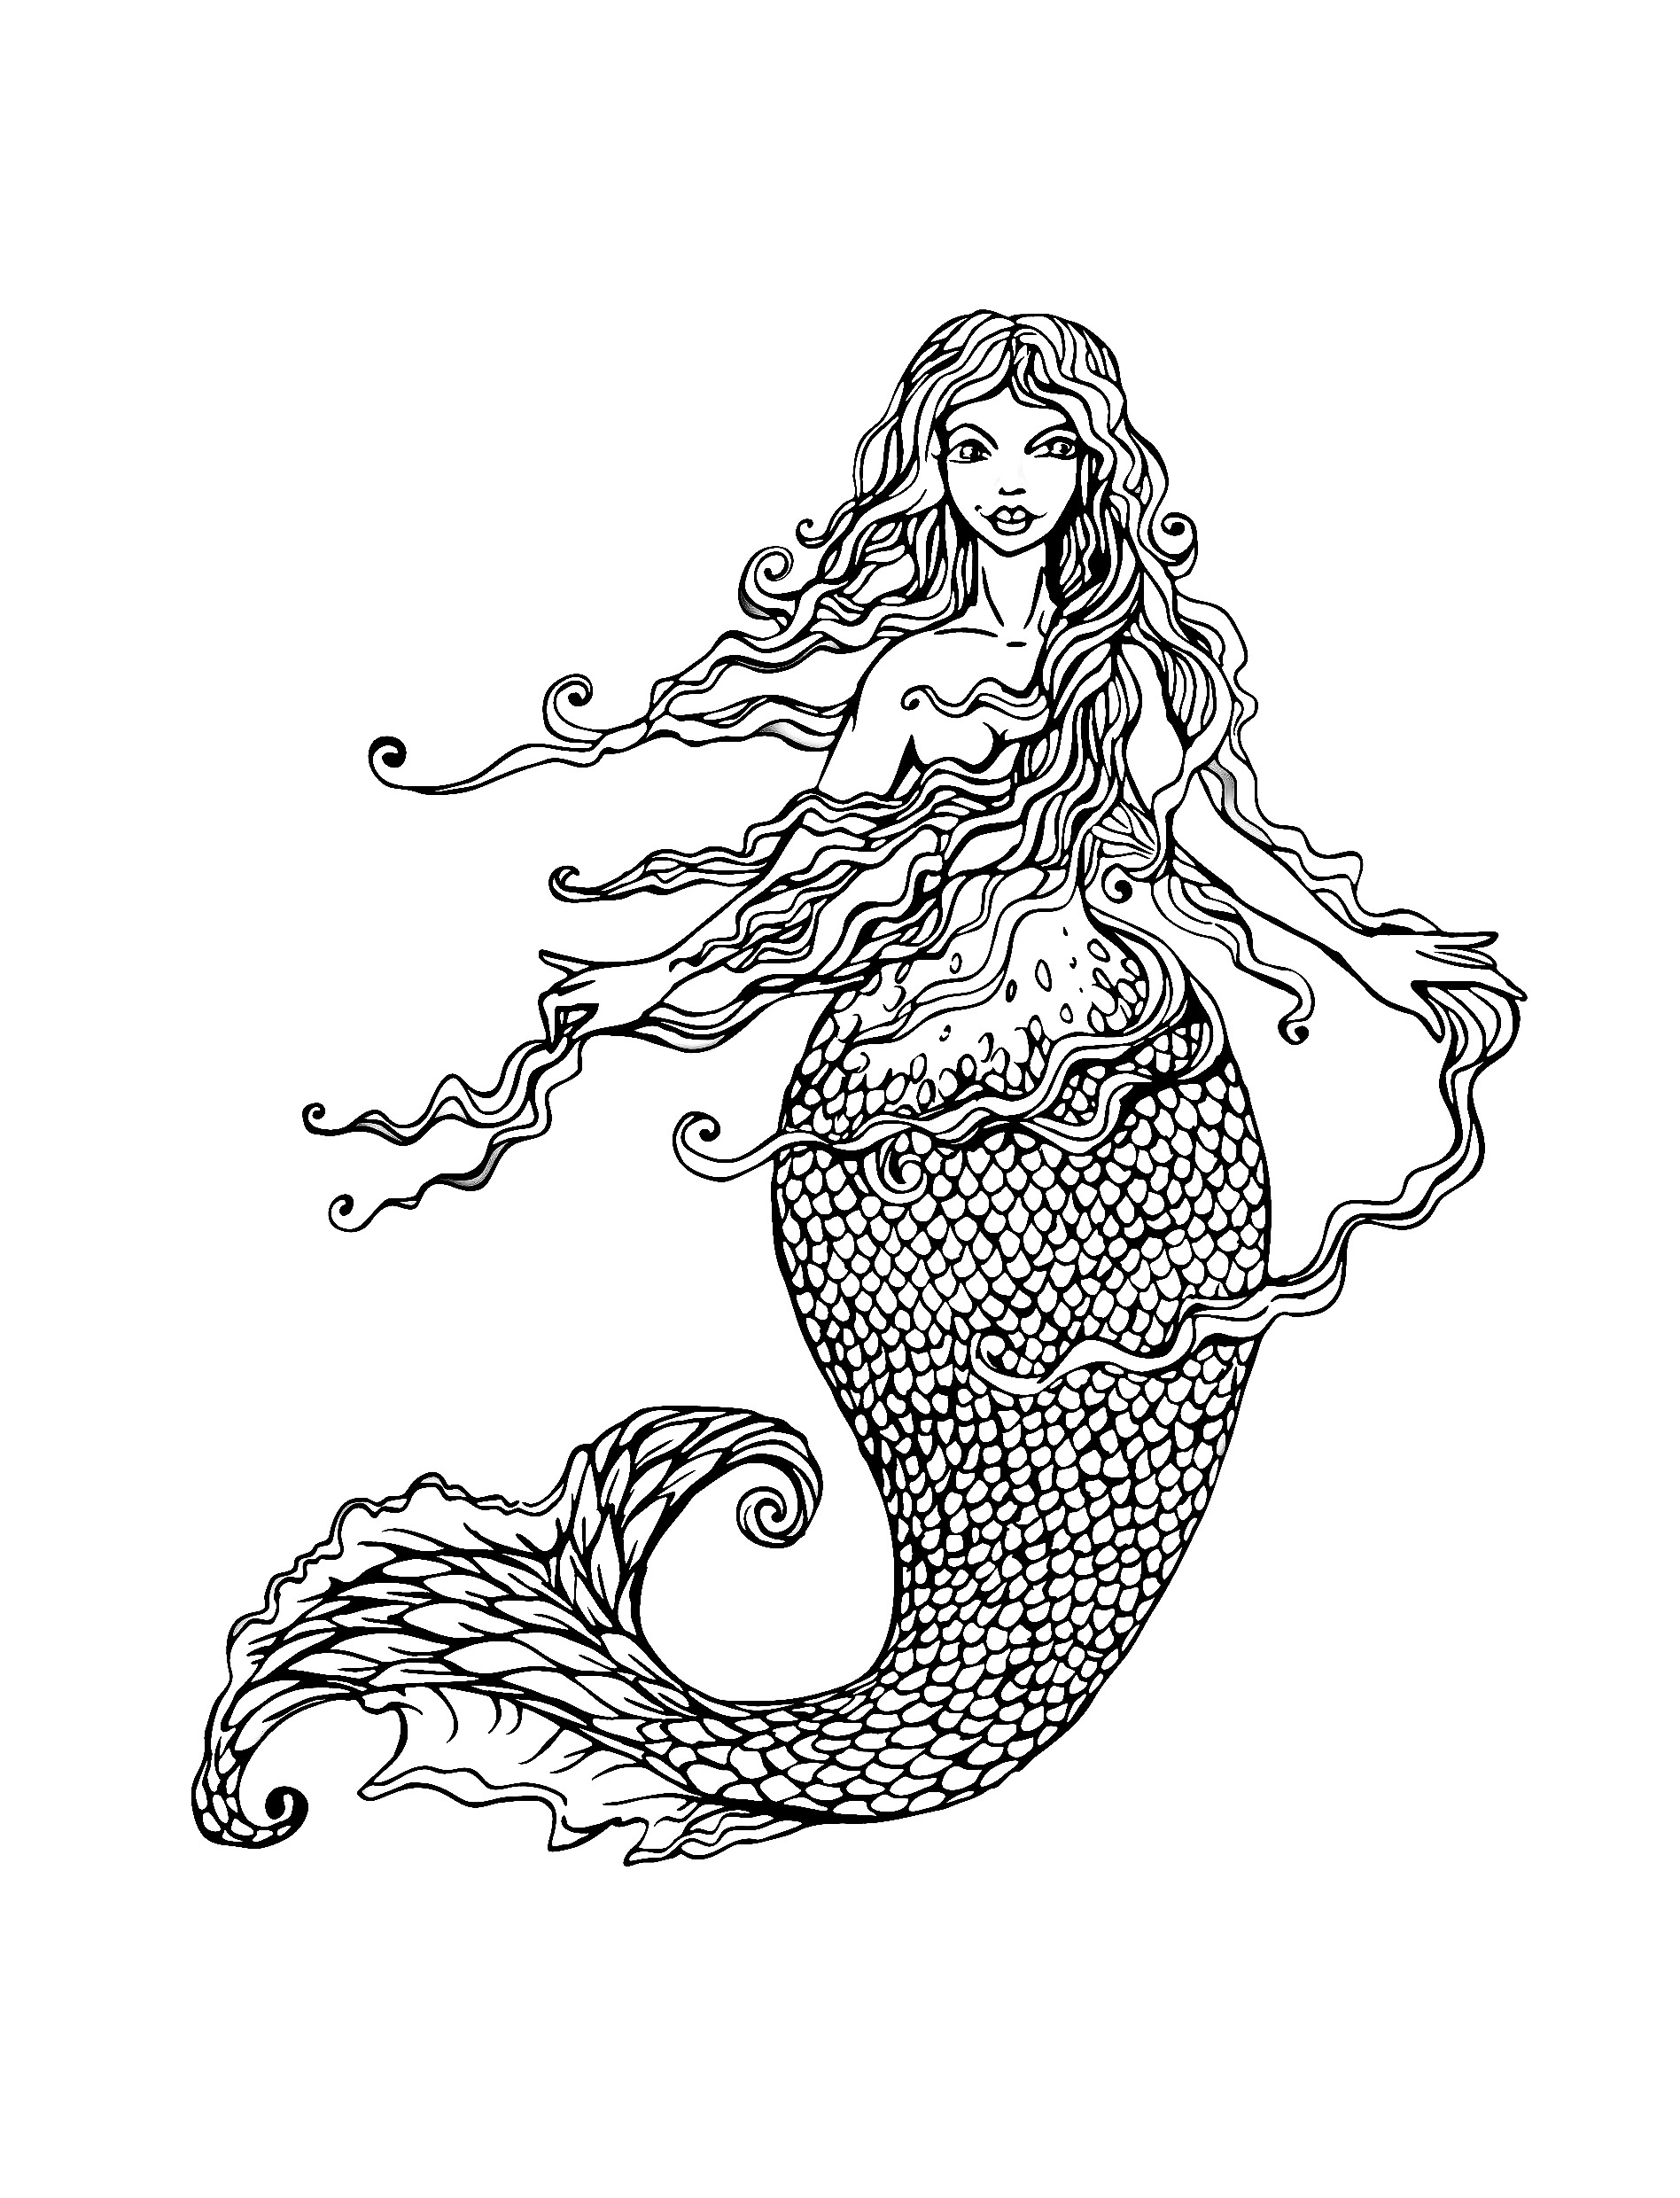 mermaid-coloring-pages-for-adults-best-coloring-pages-for-kids